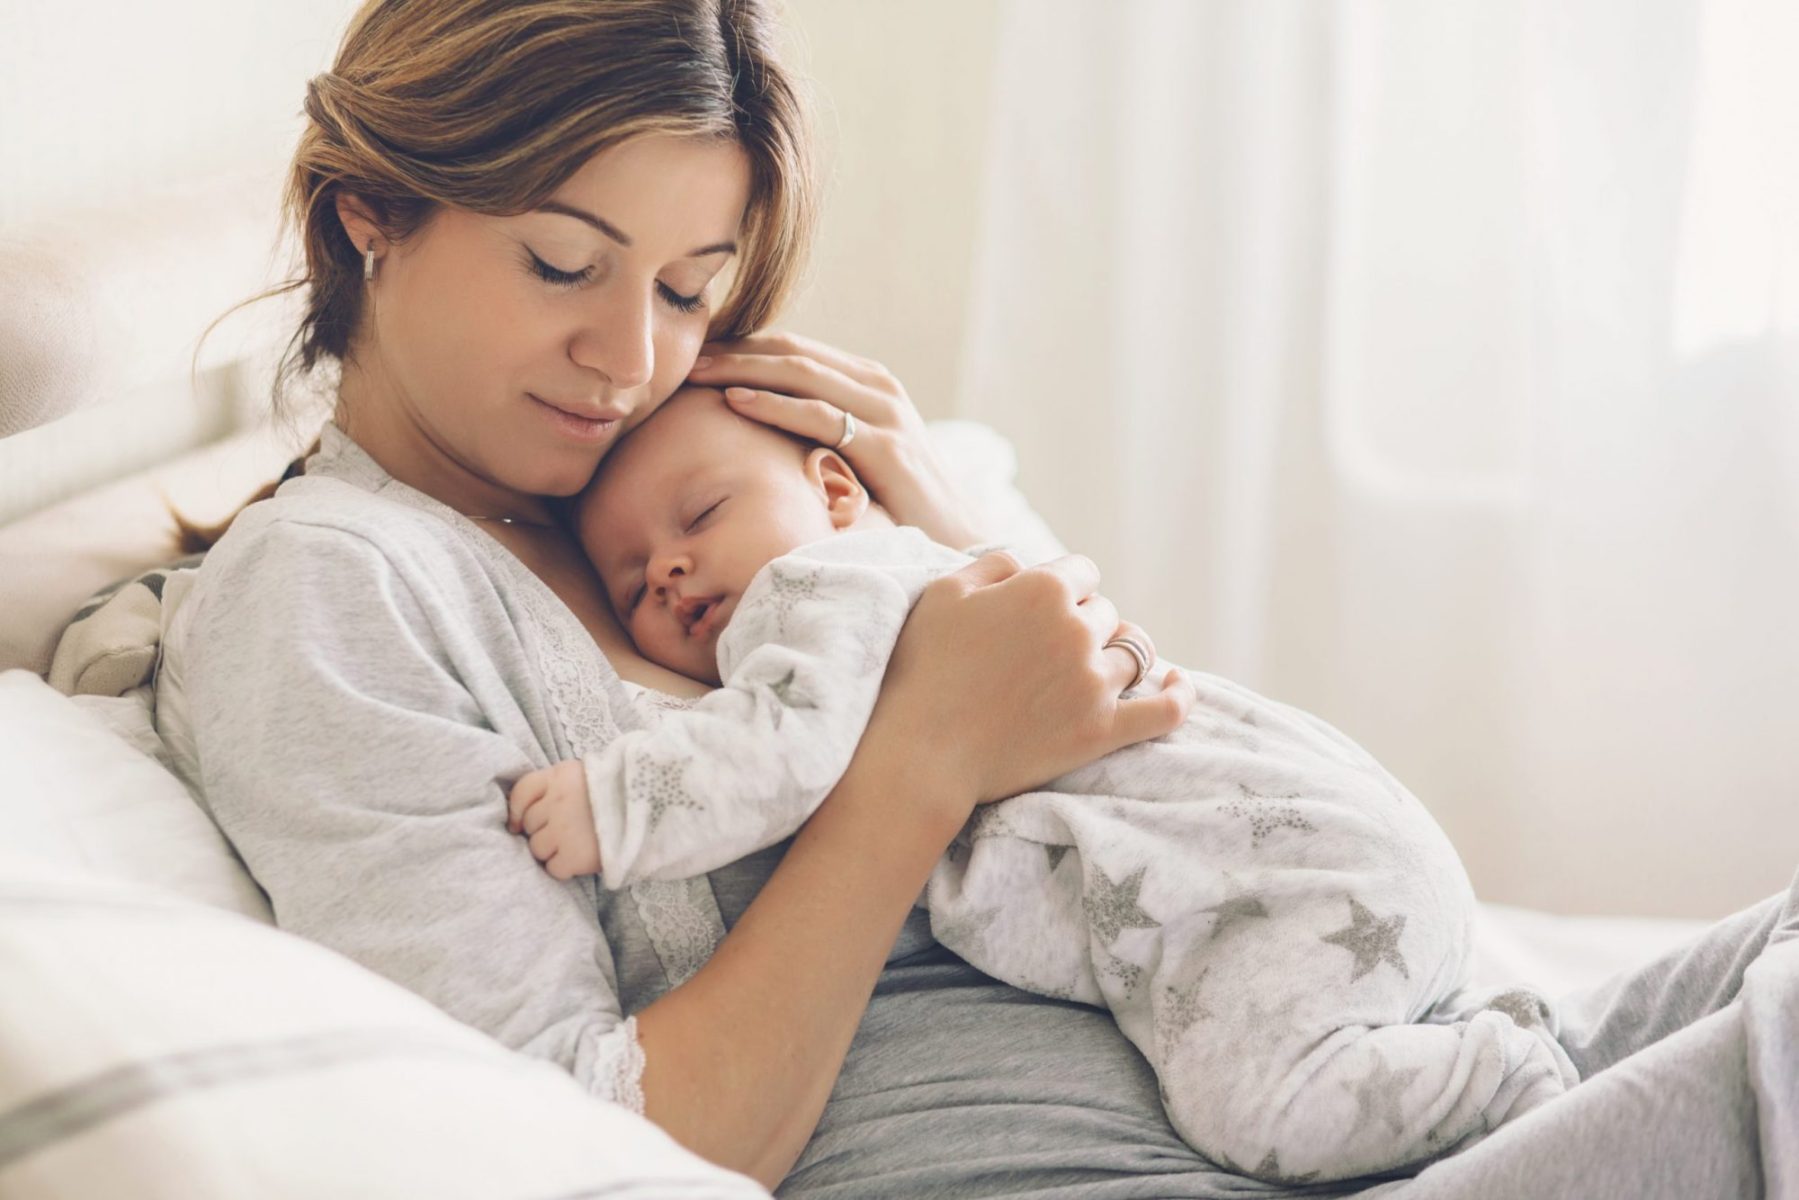 Woman holding a small sleeping baby, if deciding to end marriage, meet with a good Oak Brook divorce lawyer.